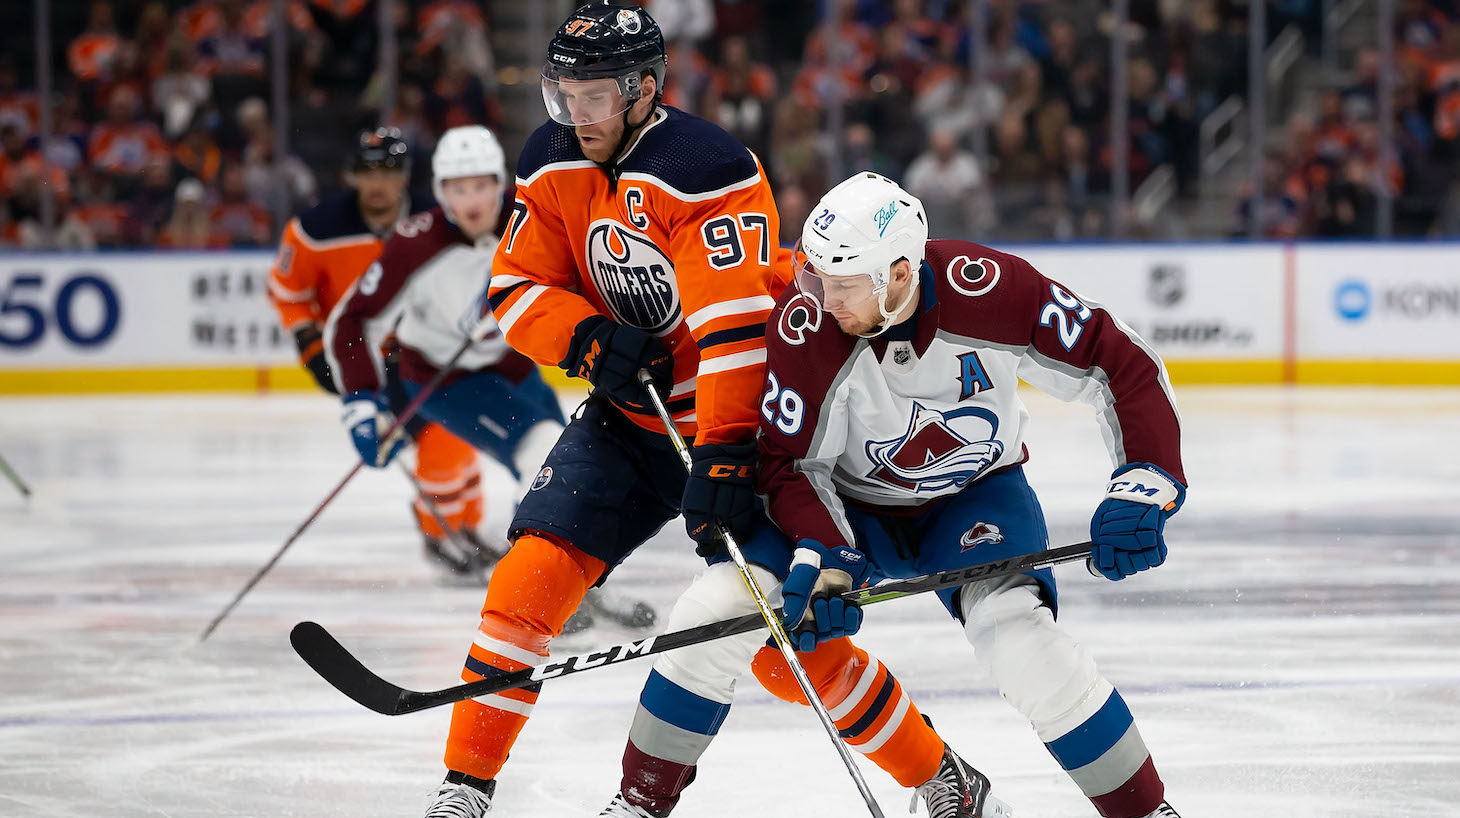 EDMONTON, AB - APRIL 09: Connor McDavid #97 of the Edmonton Oilers battles against Nathan MacKinnon #29 of the Colorado Avalanche during the second period at Rogers Place on April 9, 2022 in Edmonton, Canada. (Photo by Codie McLachlan/Getty Images)